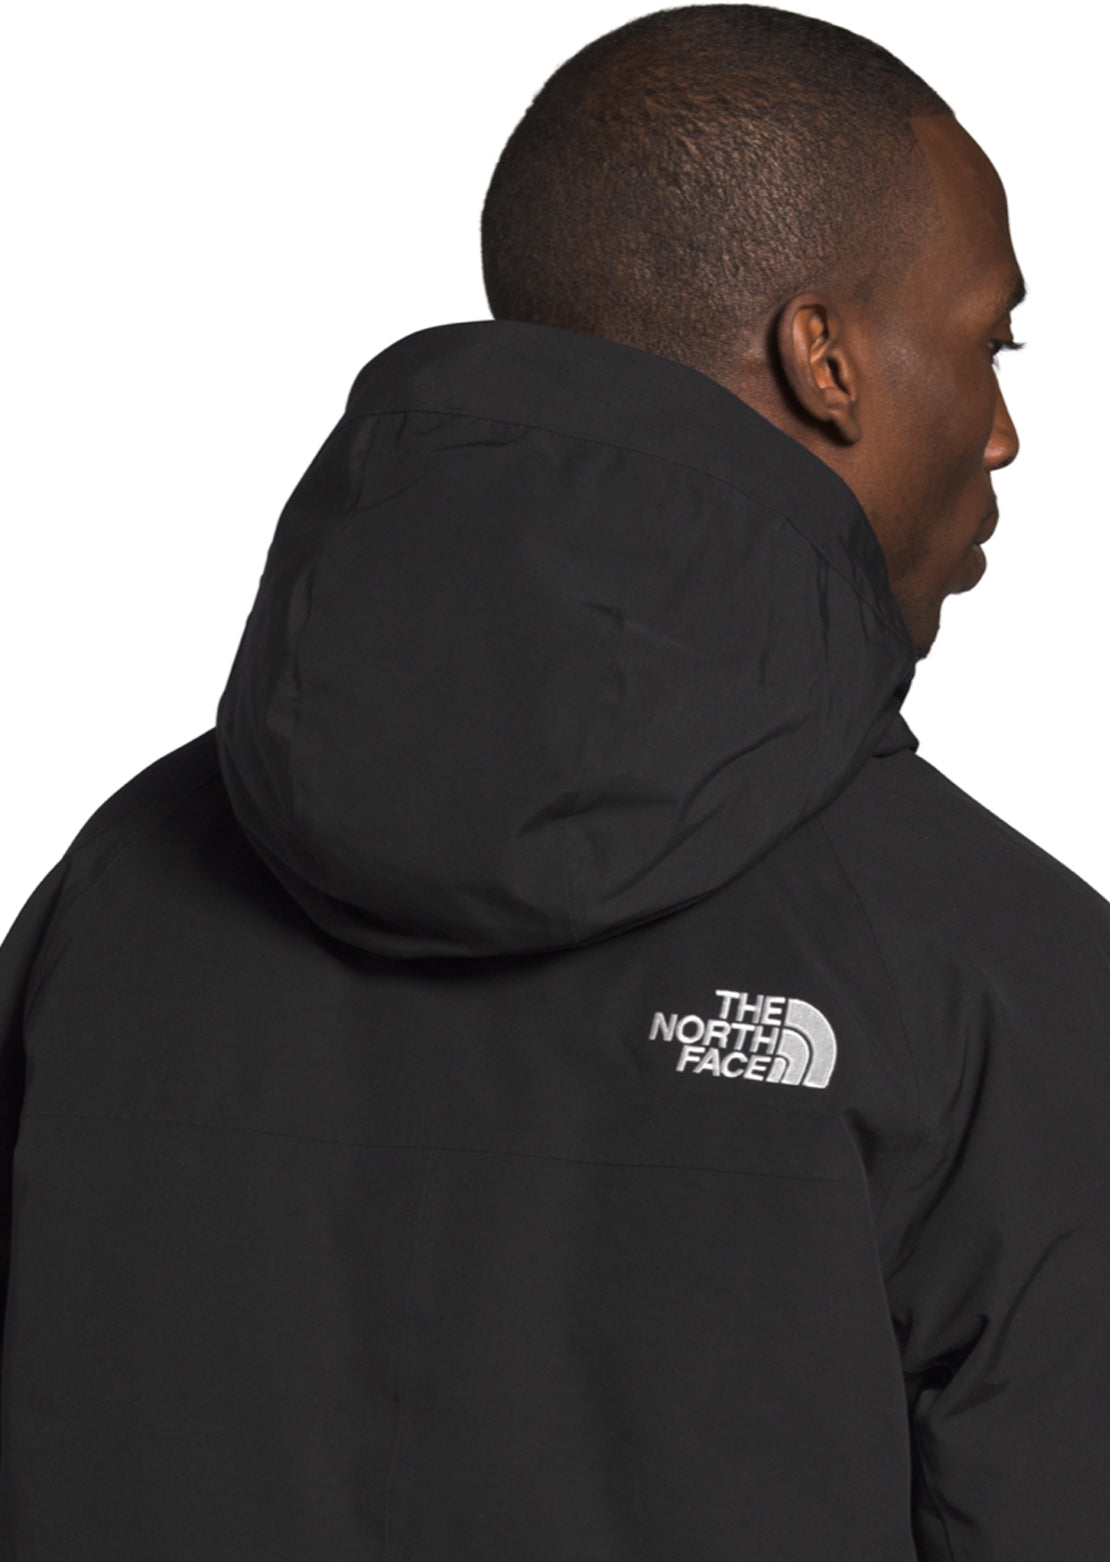 The North Face Men's New Outer Boroughs Parka Jacket - PRFO Sports